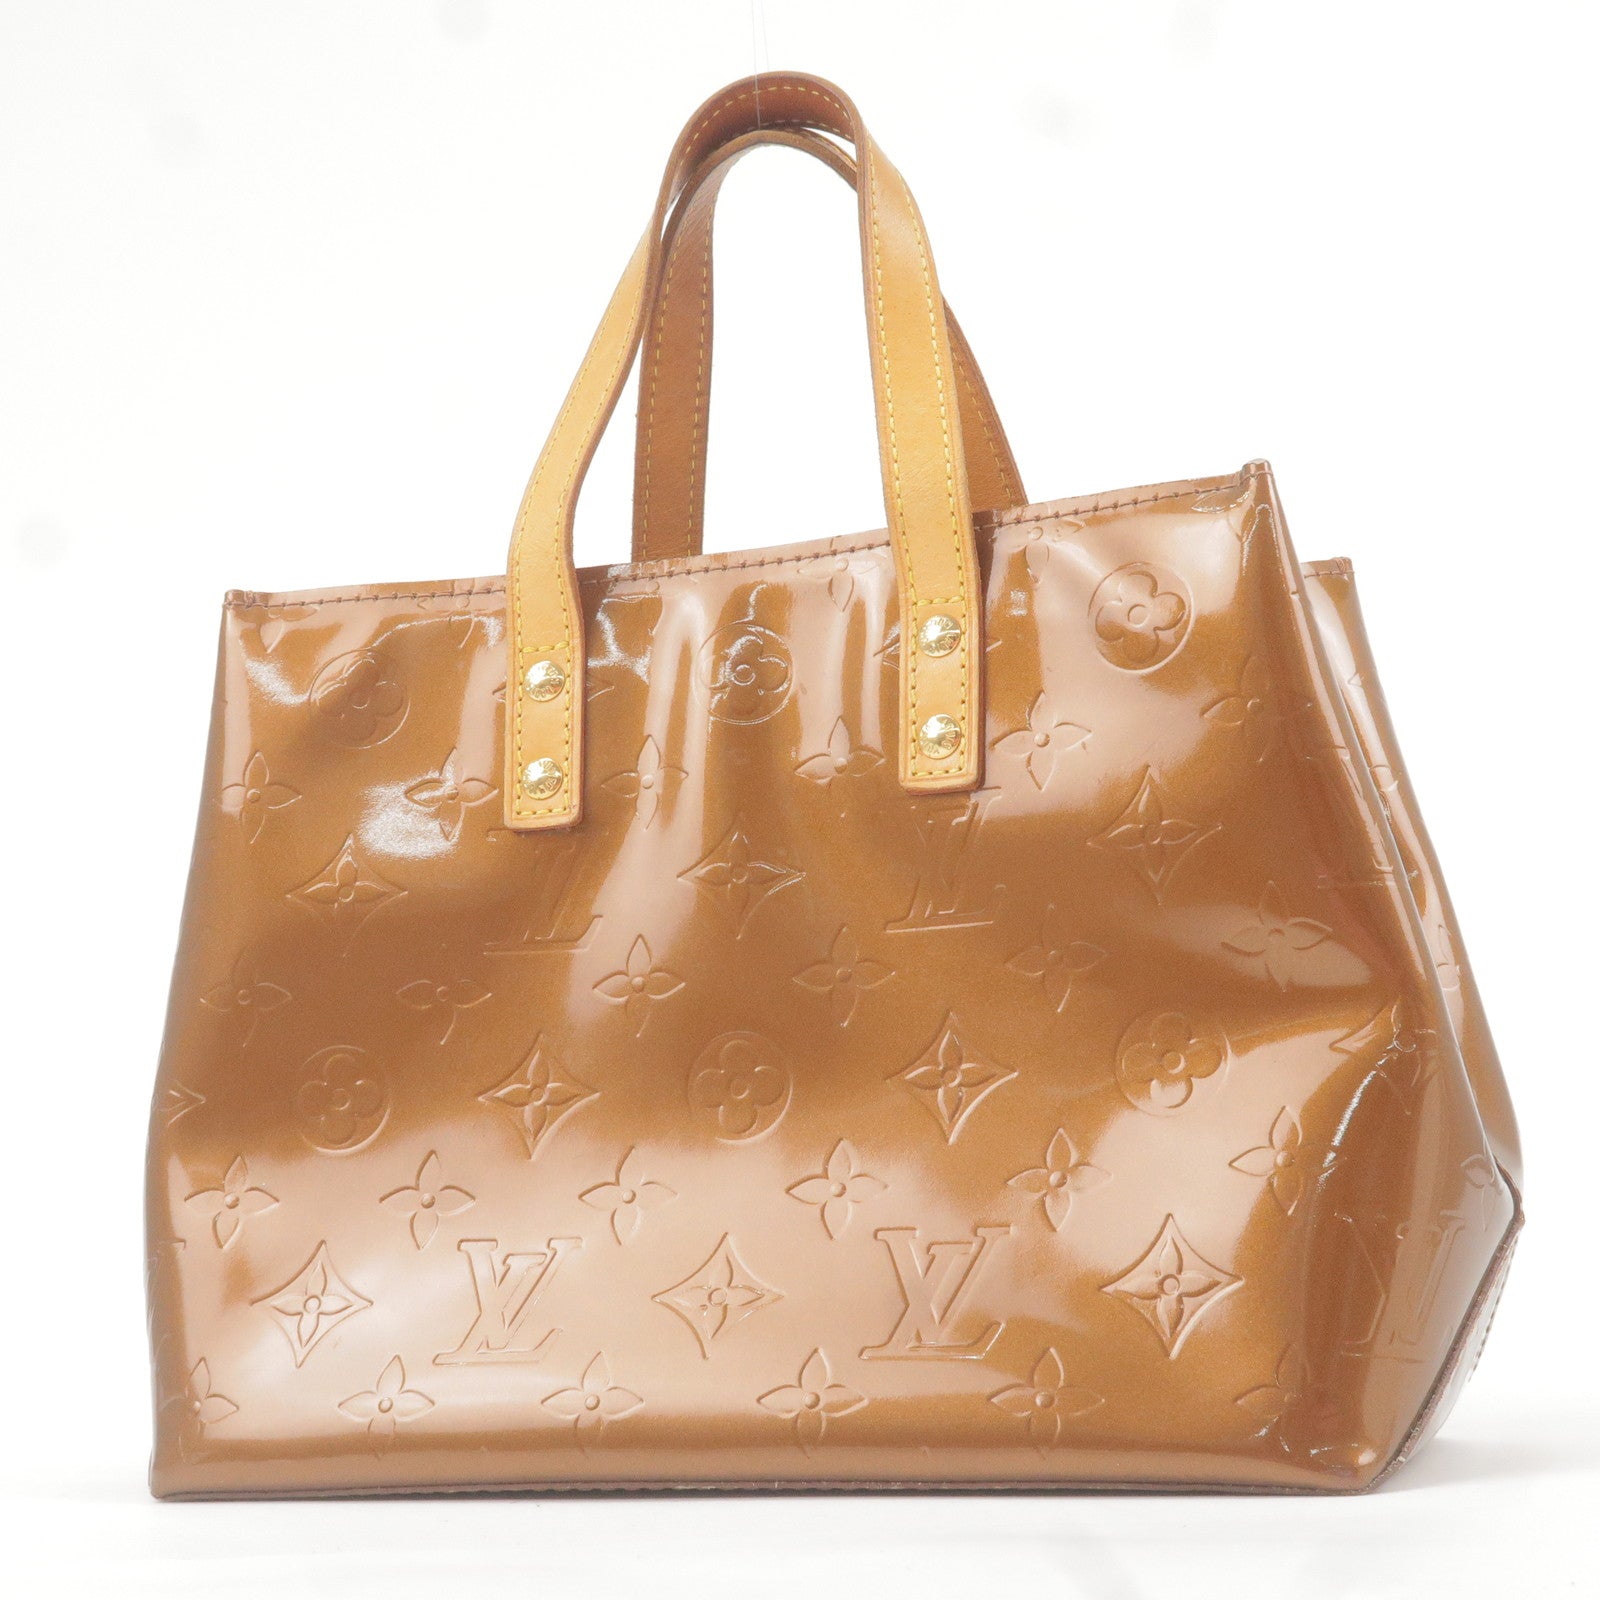 Shop for Louis Vuitton Beige Vernis Leather Reade PM Bag - Shipped from USA